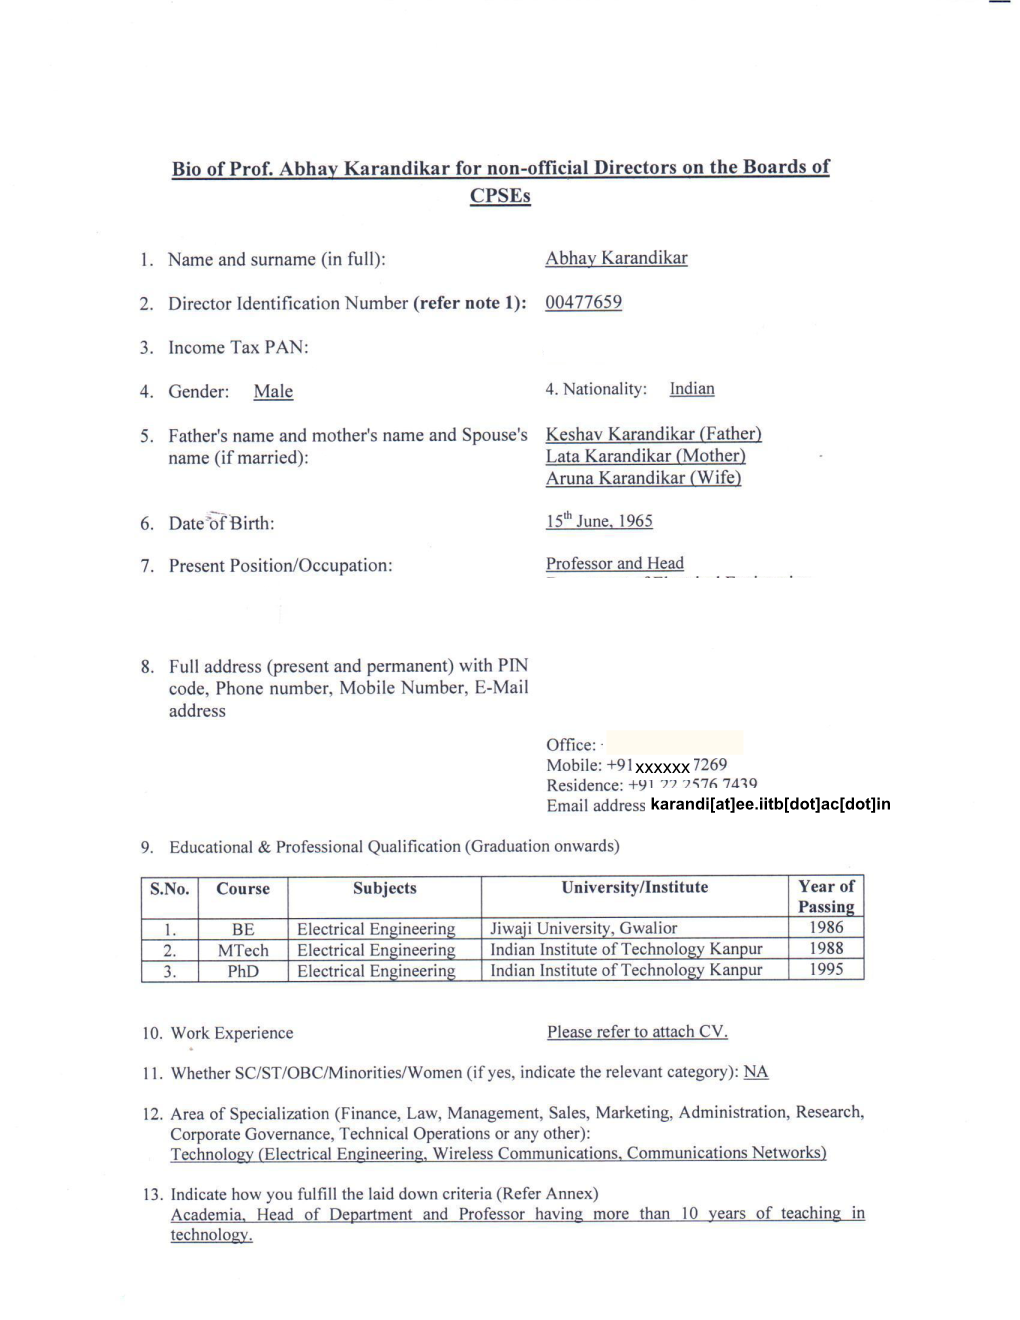 Abhay Karandikar for Non-Official Directors on the Boards of Cpses